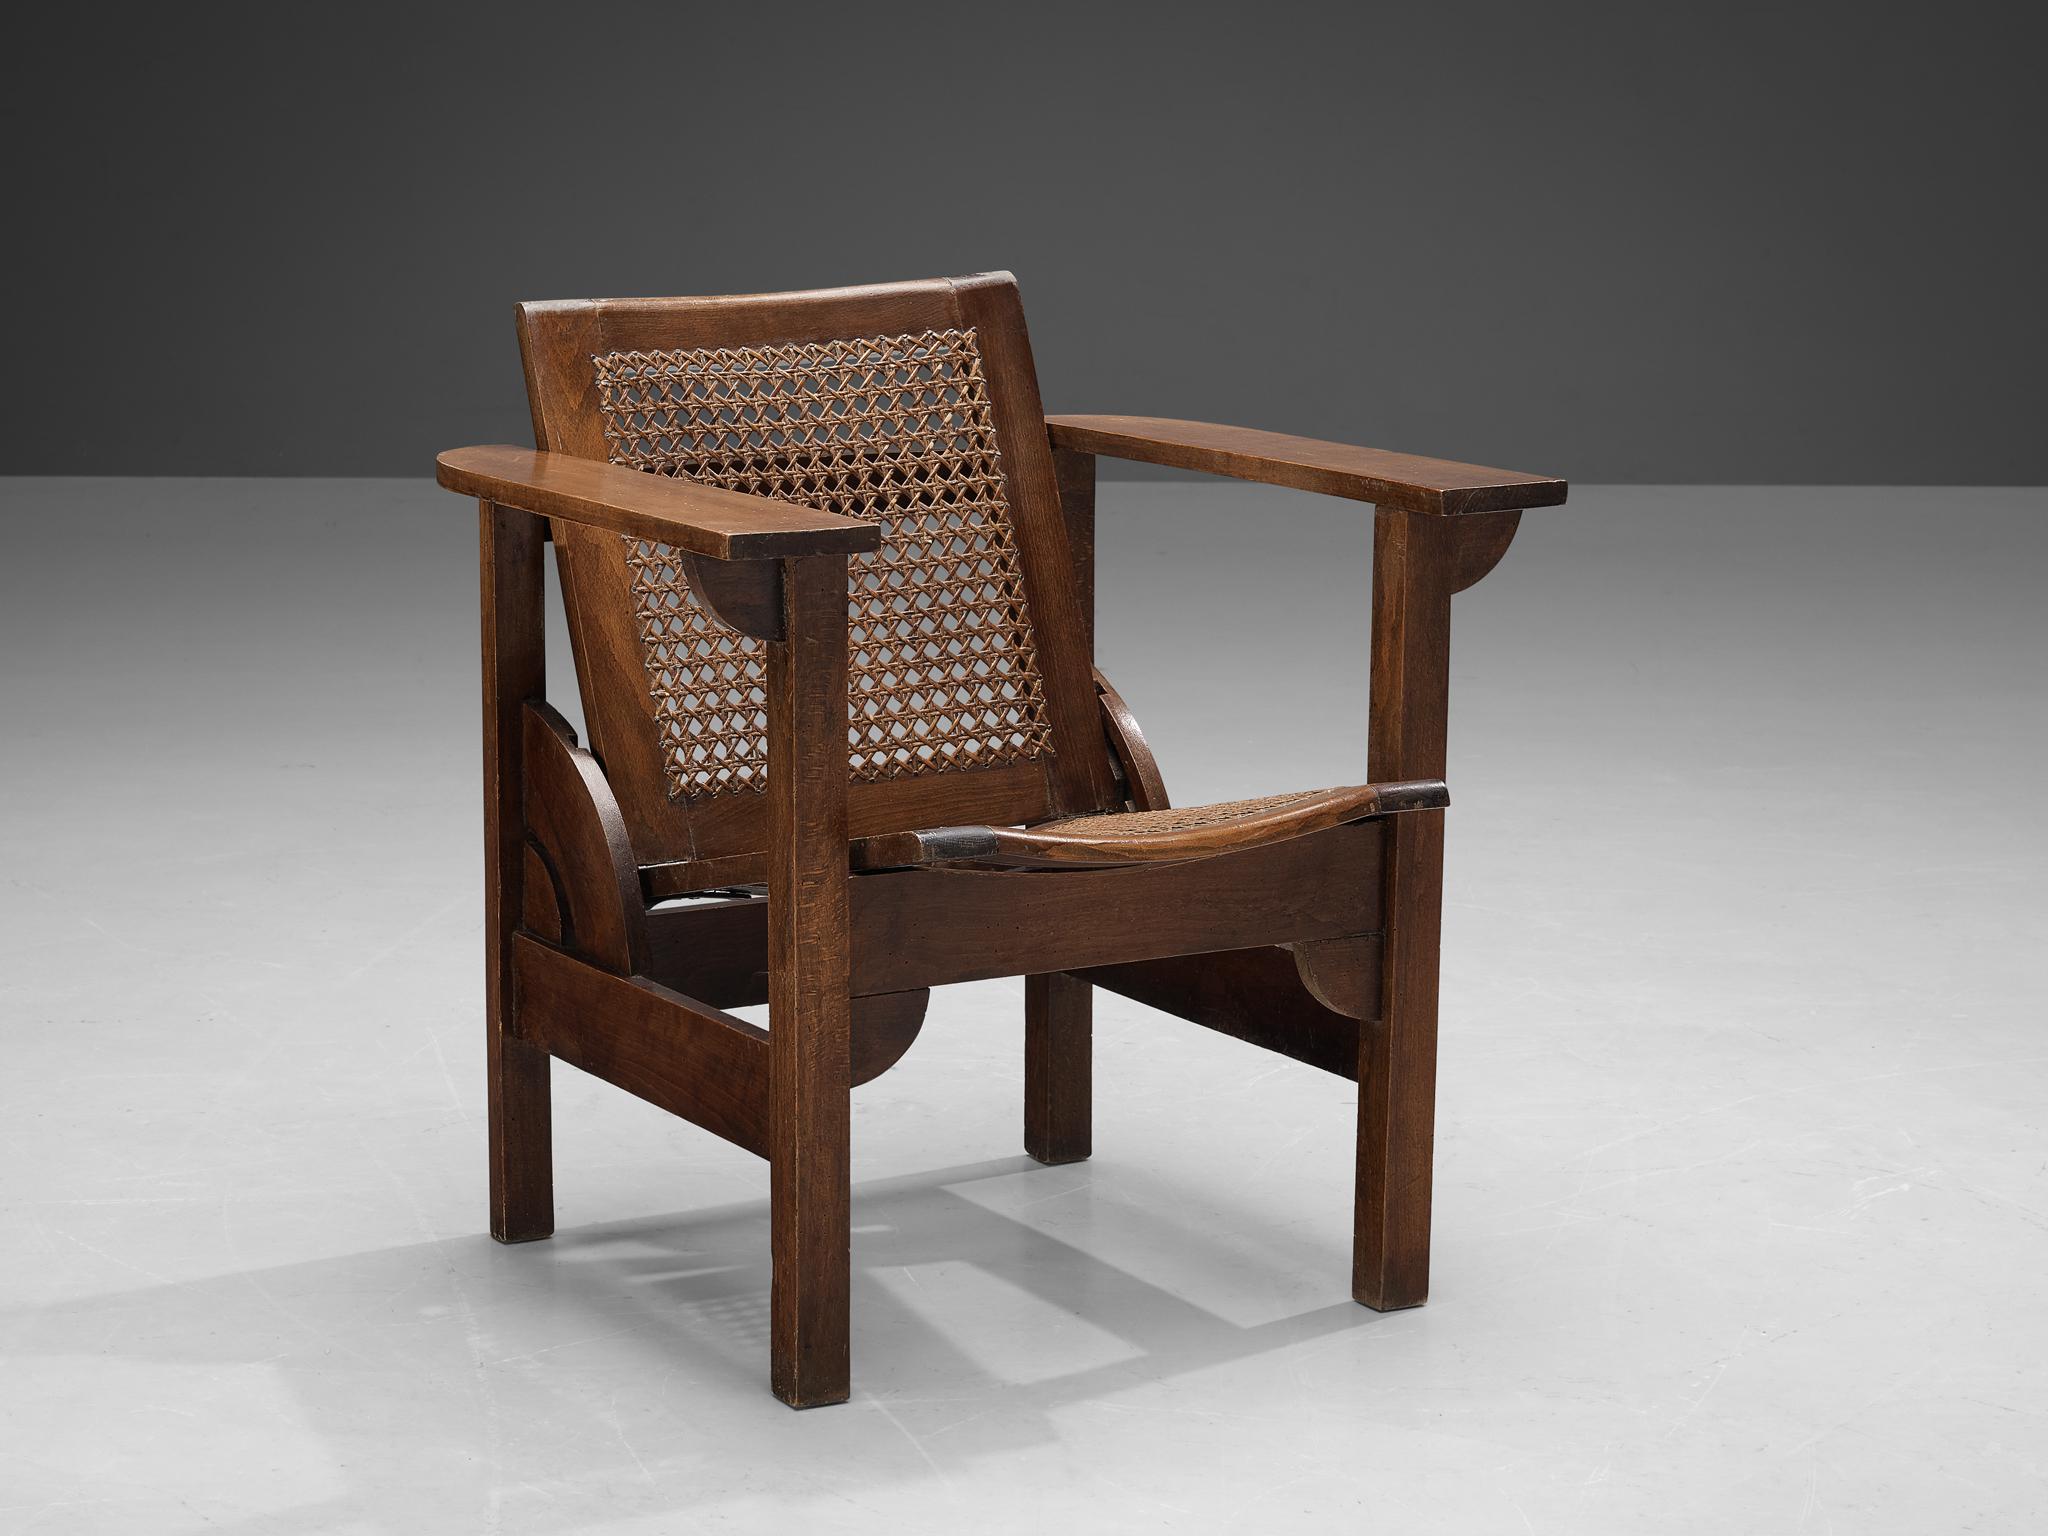 Pierre Dariel, 'Hendaye' armchair, oak, beech, cane, France, 1930s.

Sturdy 'Hendaye' model lounge chair designed by Pierre Dariel in the 1930s. The structure is composed entirely out of oak and beech, while the seat and backrest are made of cane.